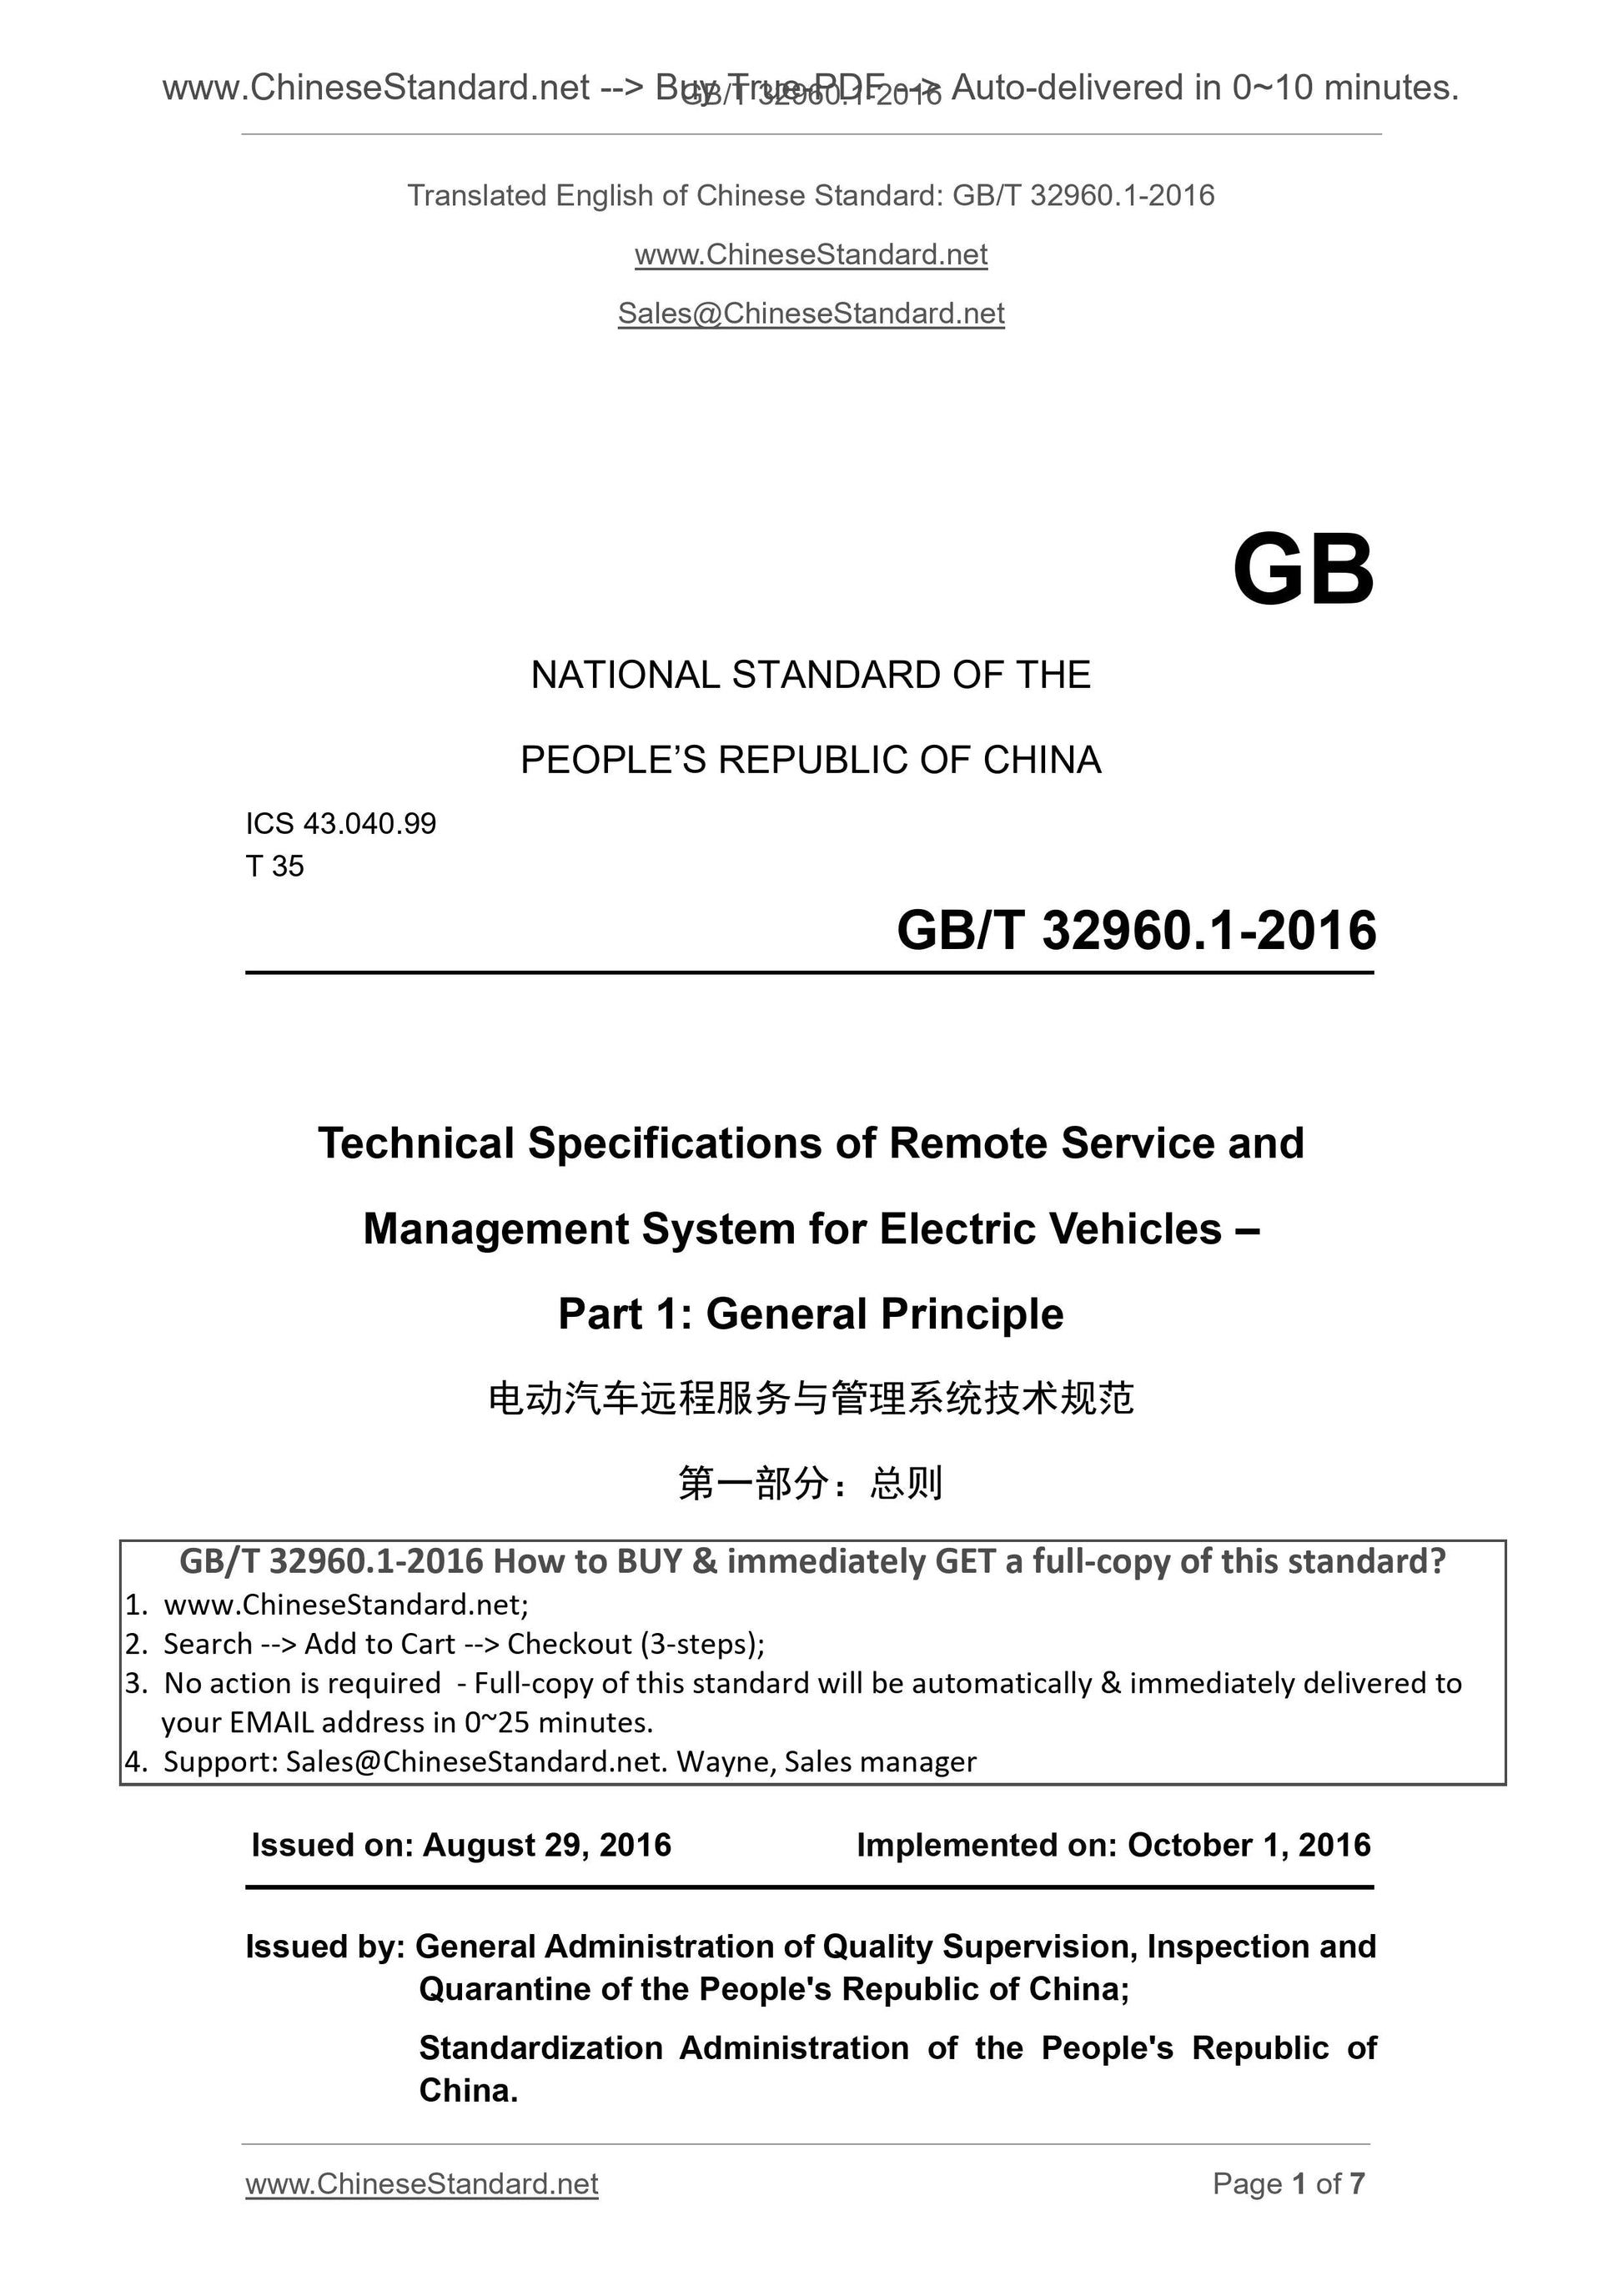 GB/T 32960.1-2016 Page 1